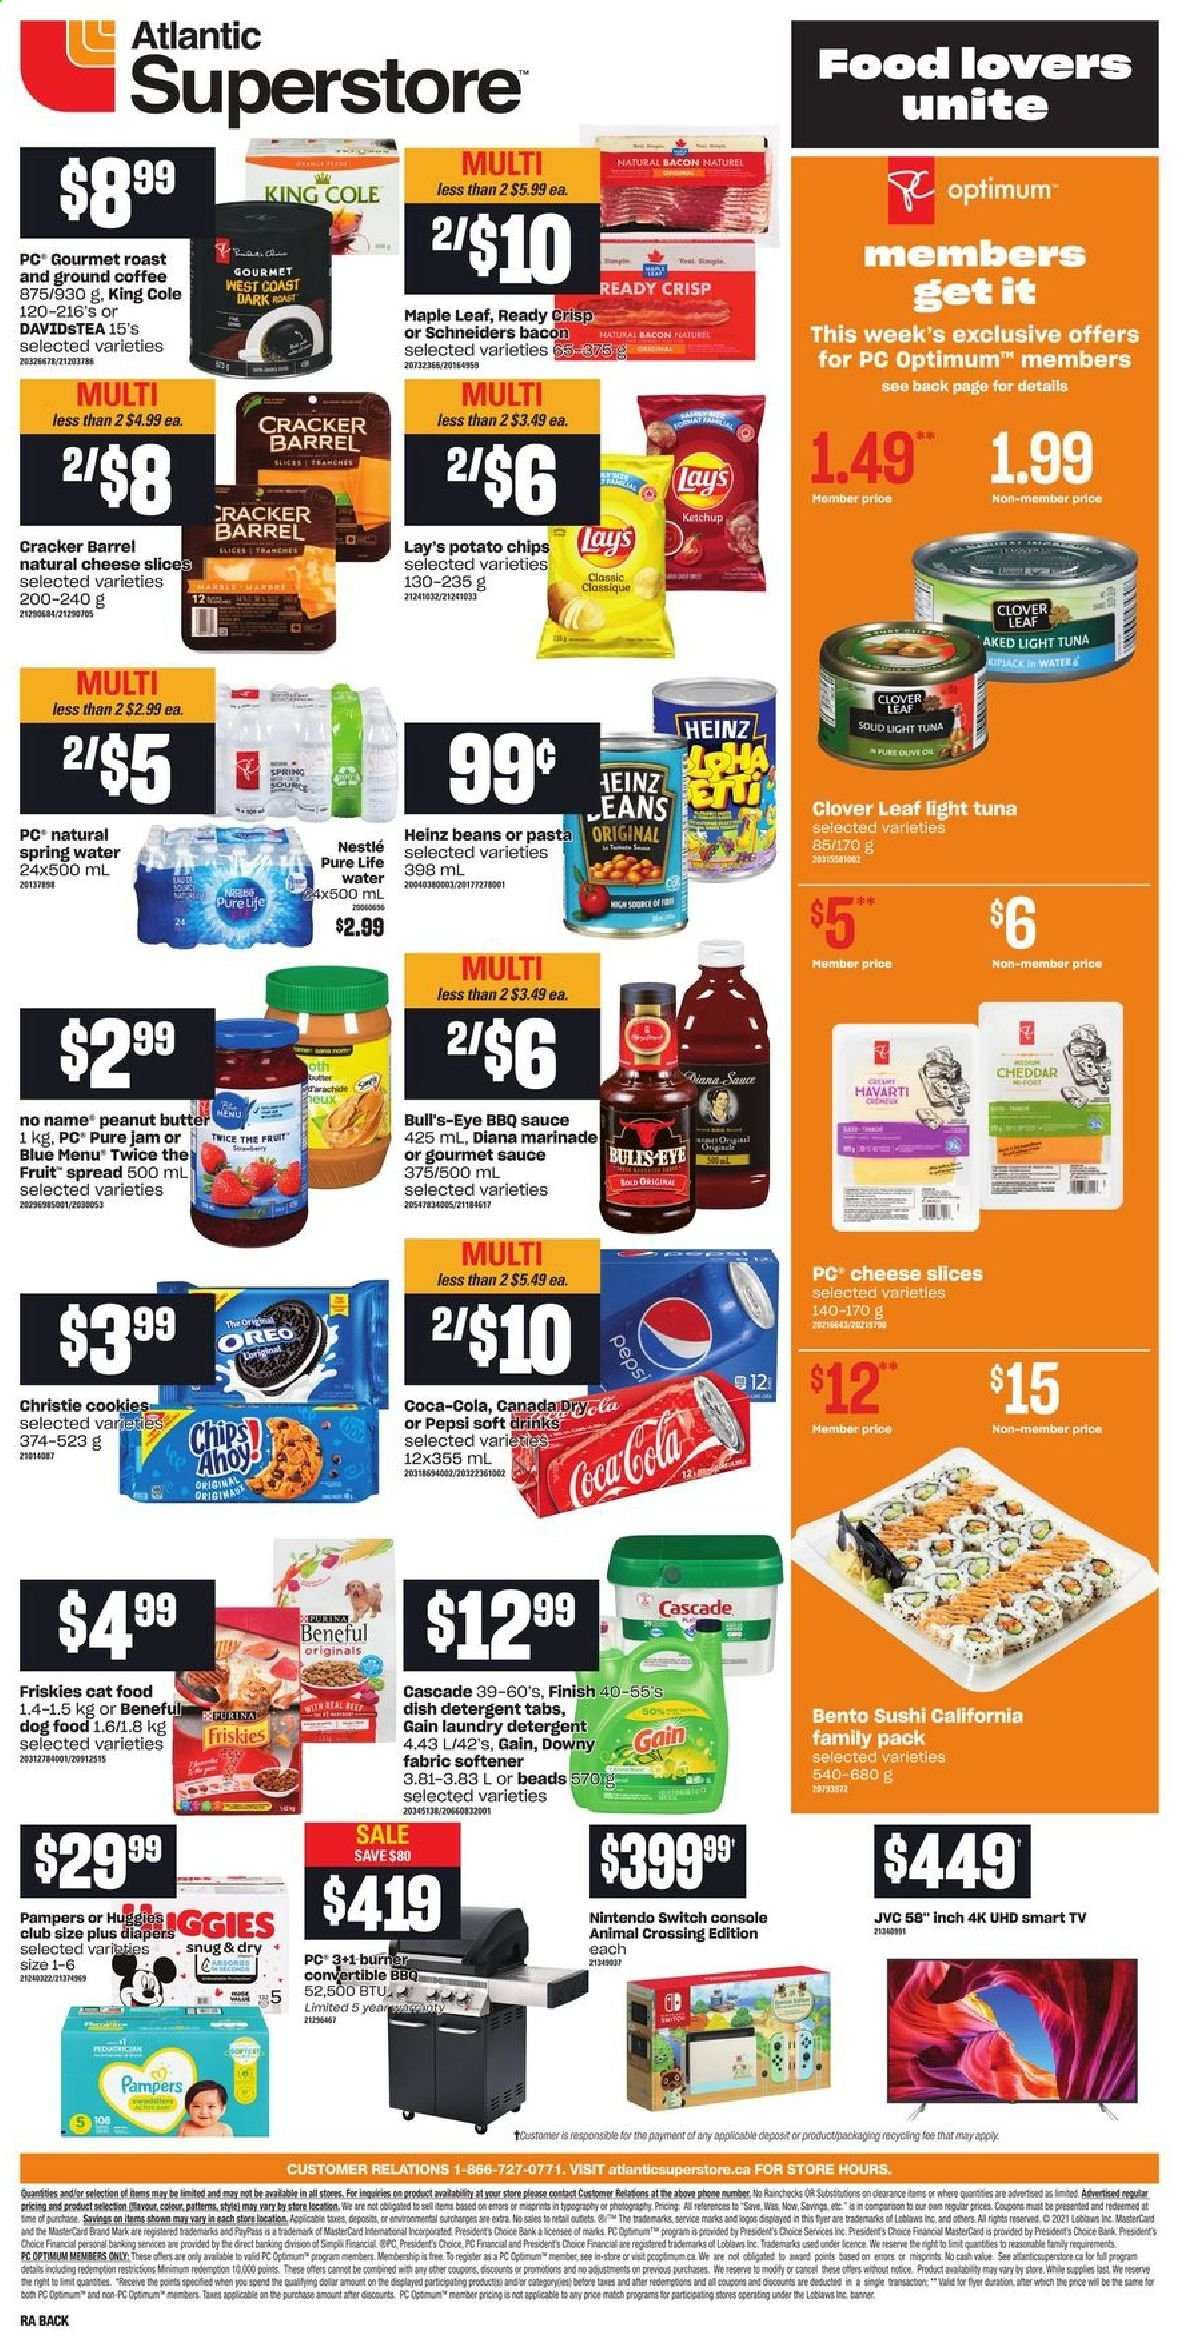 Atlantic Superstore flyer  - May 13, 2021 - May 19, 2021. Page 2.